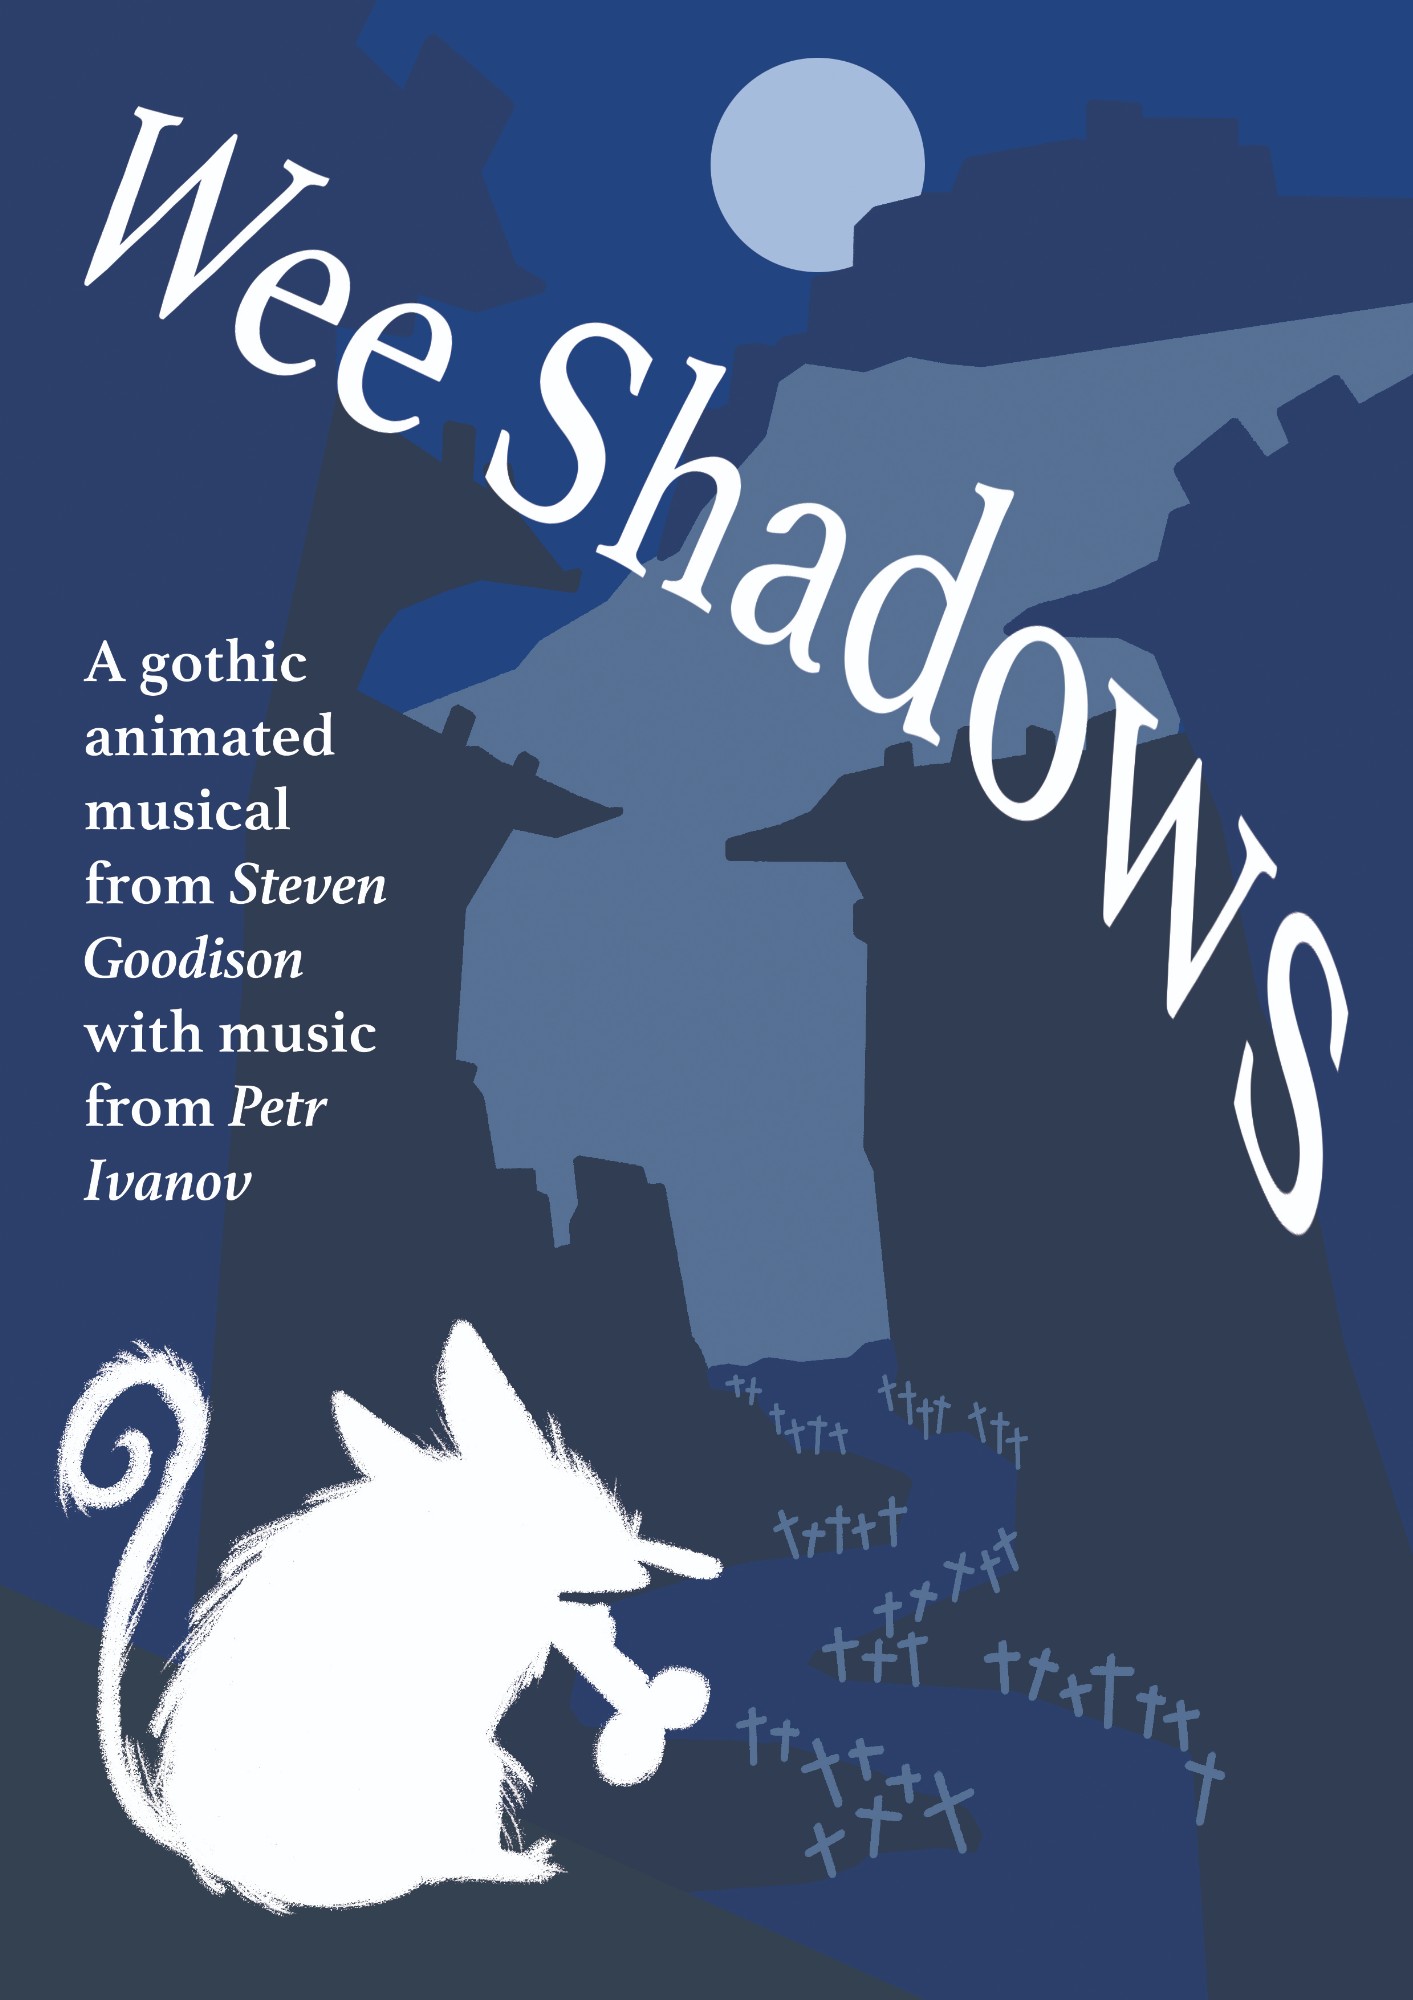 Poster for Wee Shadows